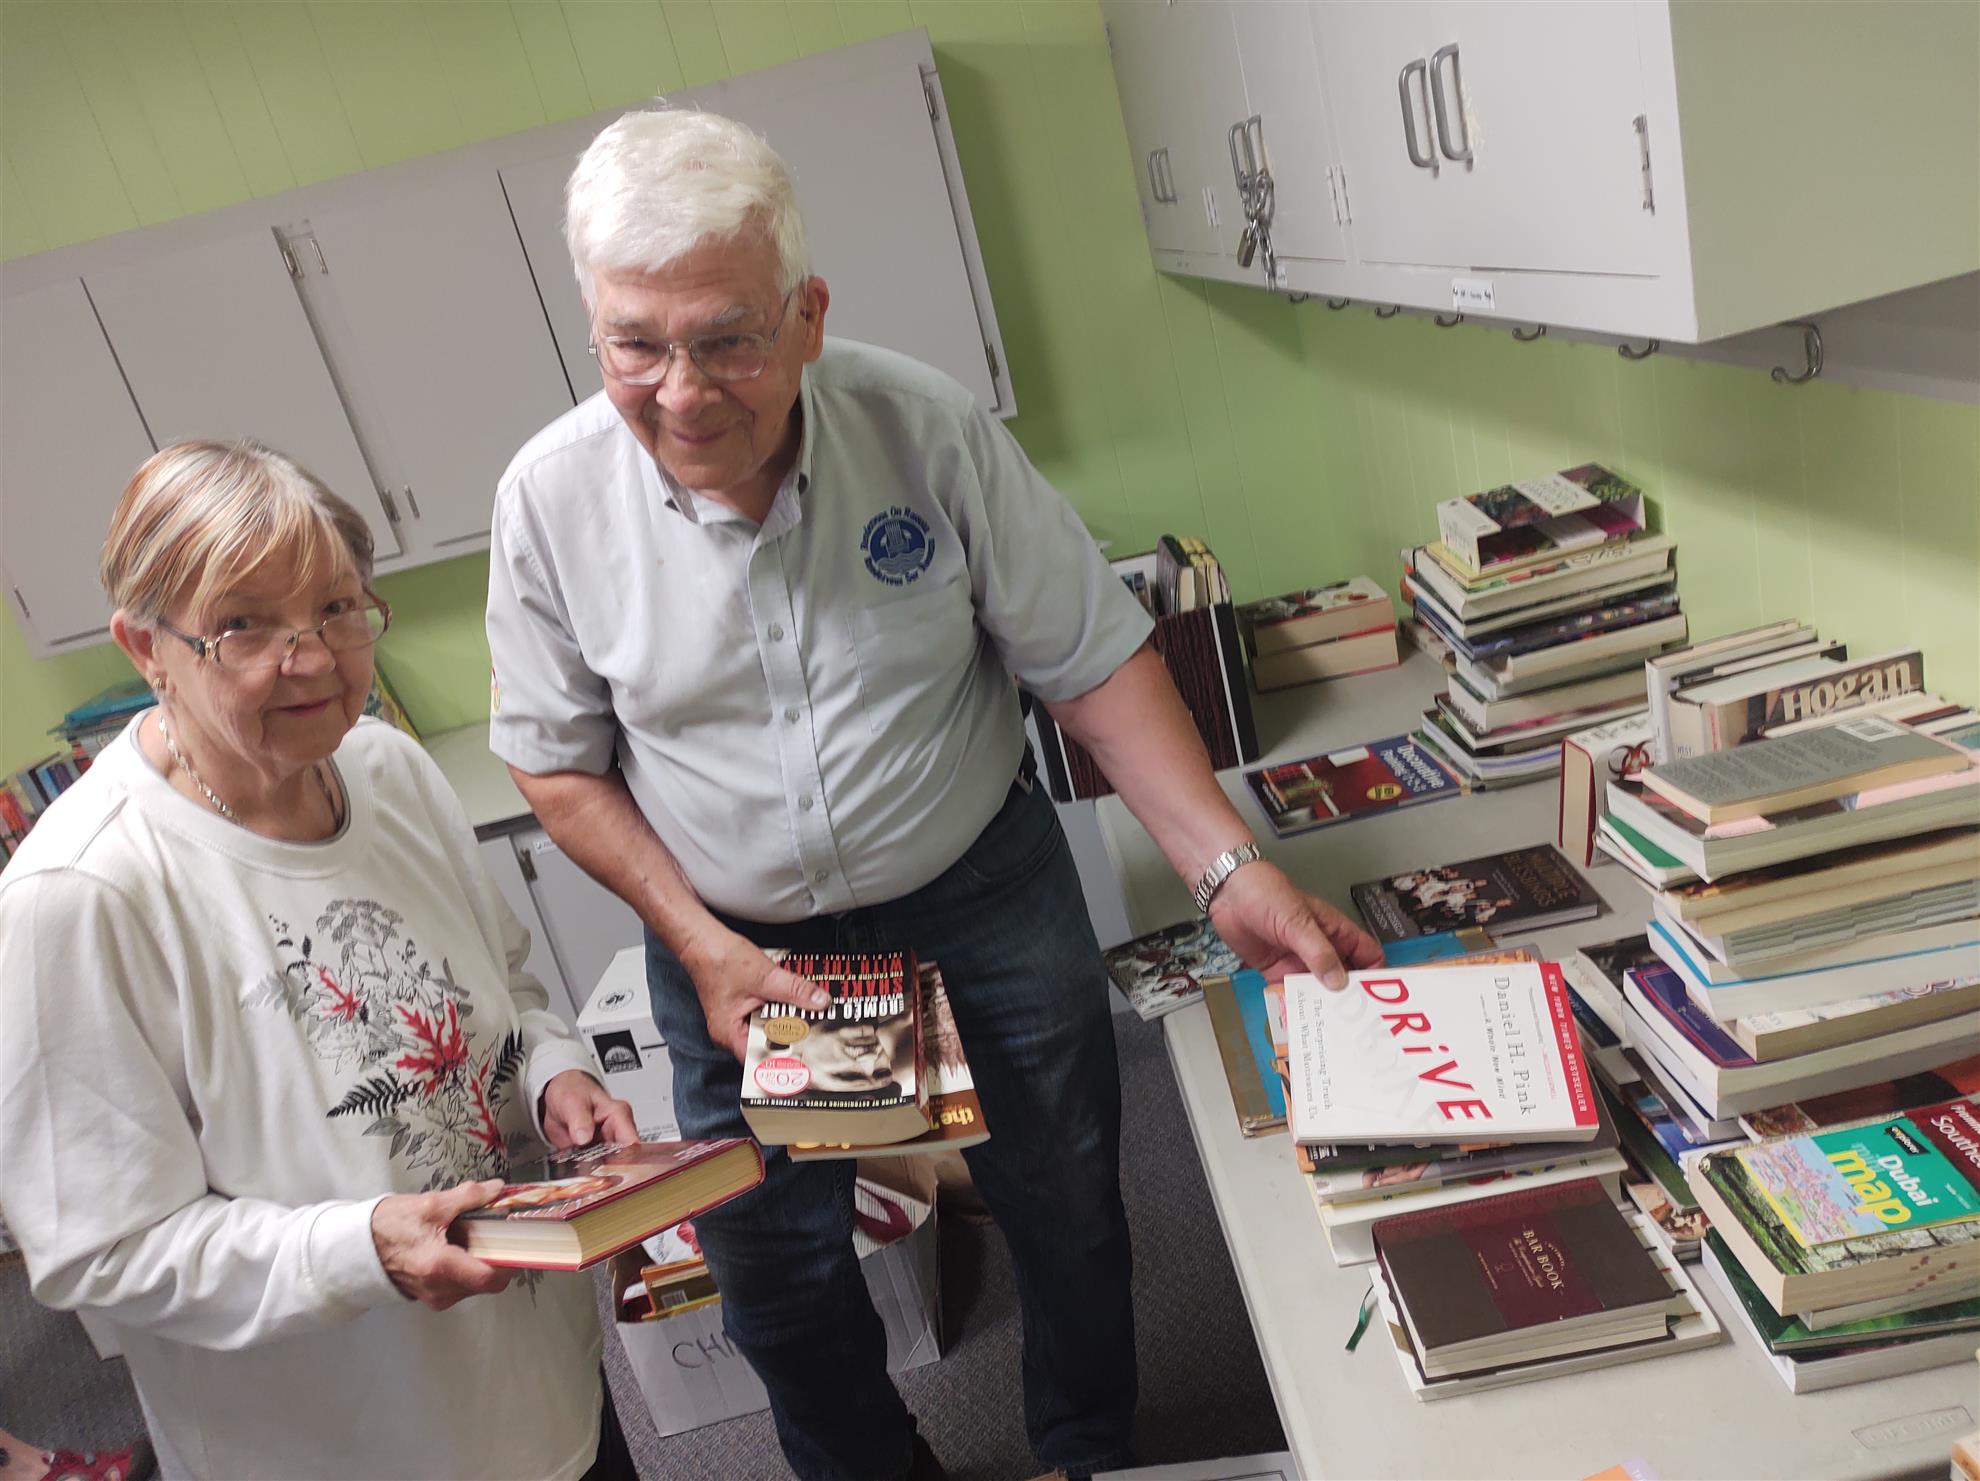 An older couple smiles for the camera while sorting a table filled with books.